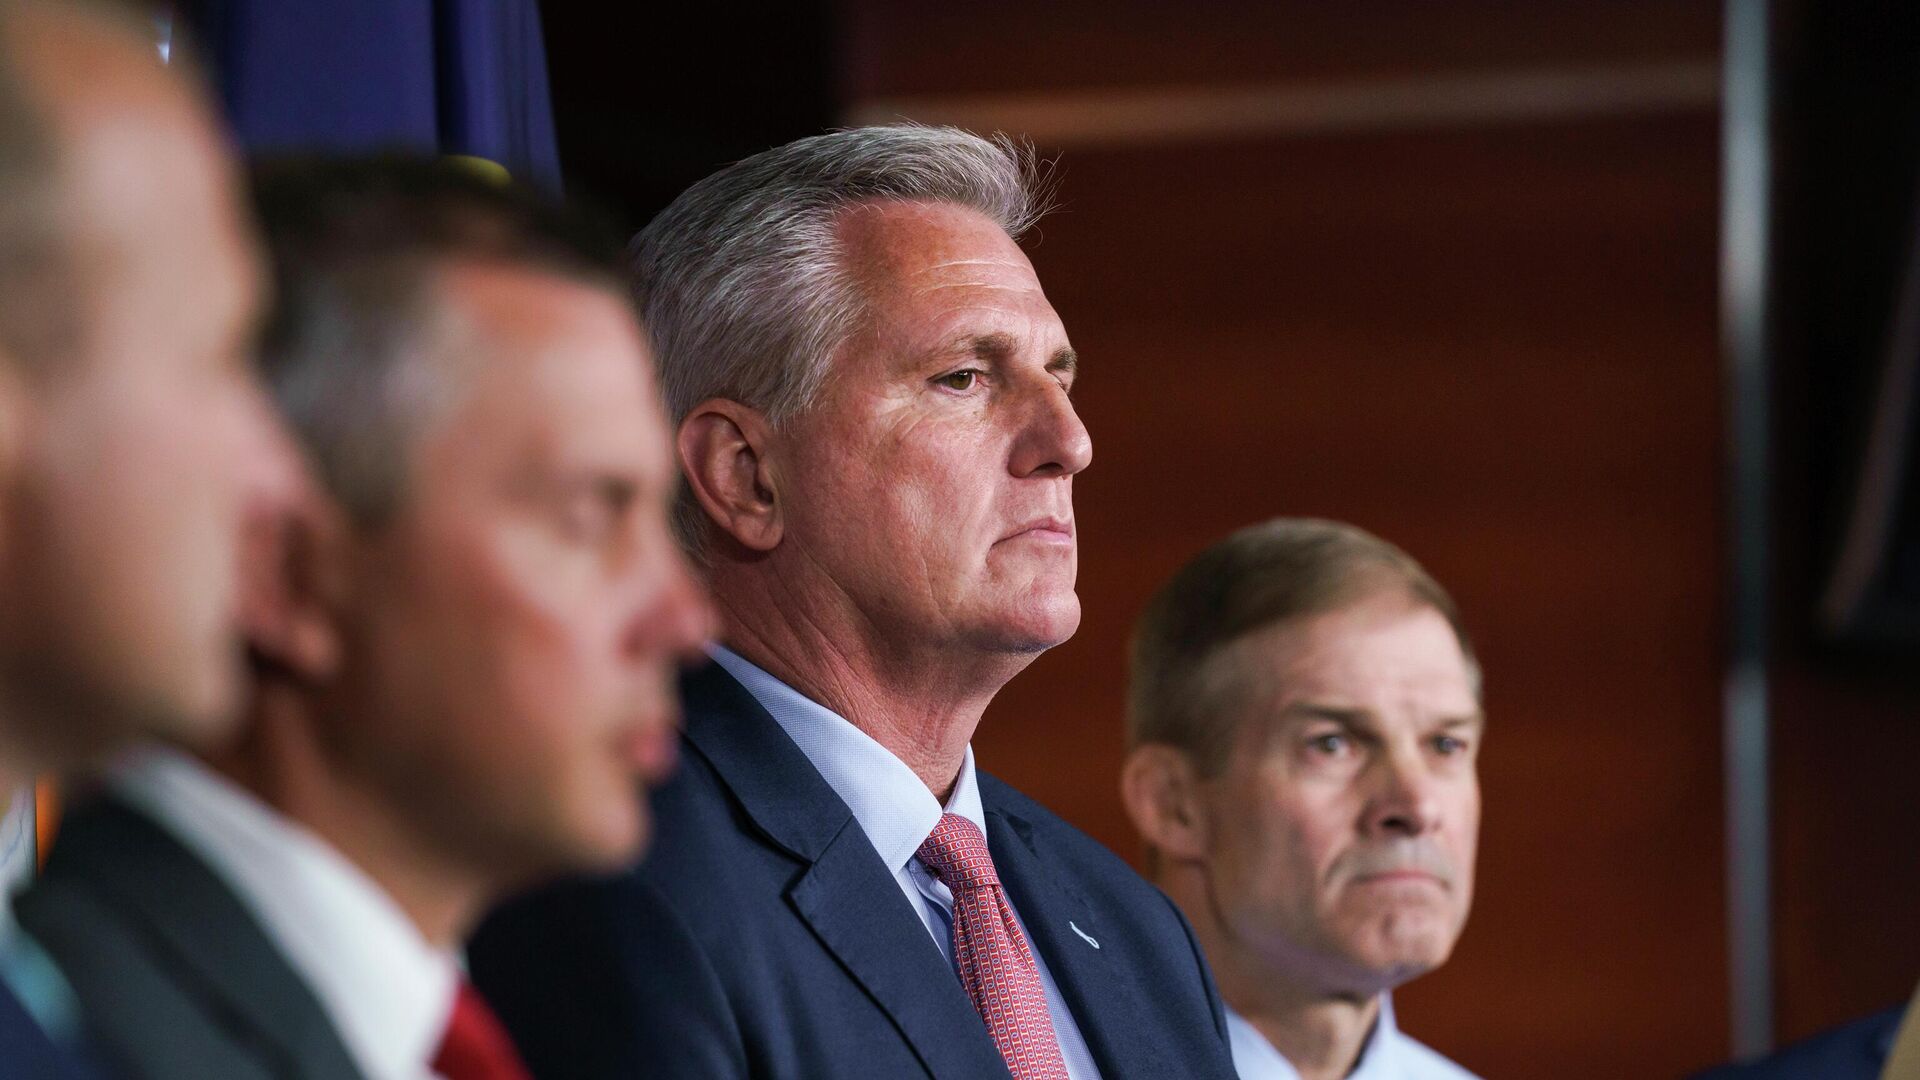 House Minority Leader Kevin McCarthy, R-Calif., center, joined at right by Rep. Jim Jordan, R-Ohio, pause during a news conference after House Speaker Nancy Pelosi rejected two Republicans chosen for the committee investigating the Jan. 6 Capitol insurrection, Rep. Jim Banks, R-Ind., and Rep. Jordan, R-Ohio, at the Capitol in Washington, Wednesday, July 21, 2021. McCarthy is denouncing the decision as an egregious abuse of power, by Pelosi.  - Sputnik International, 1920, 12.05.2022